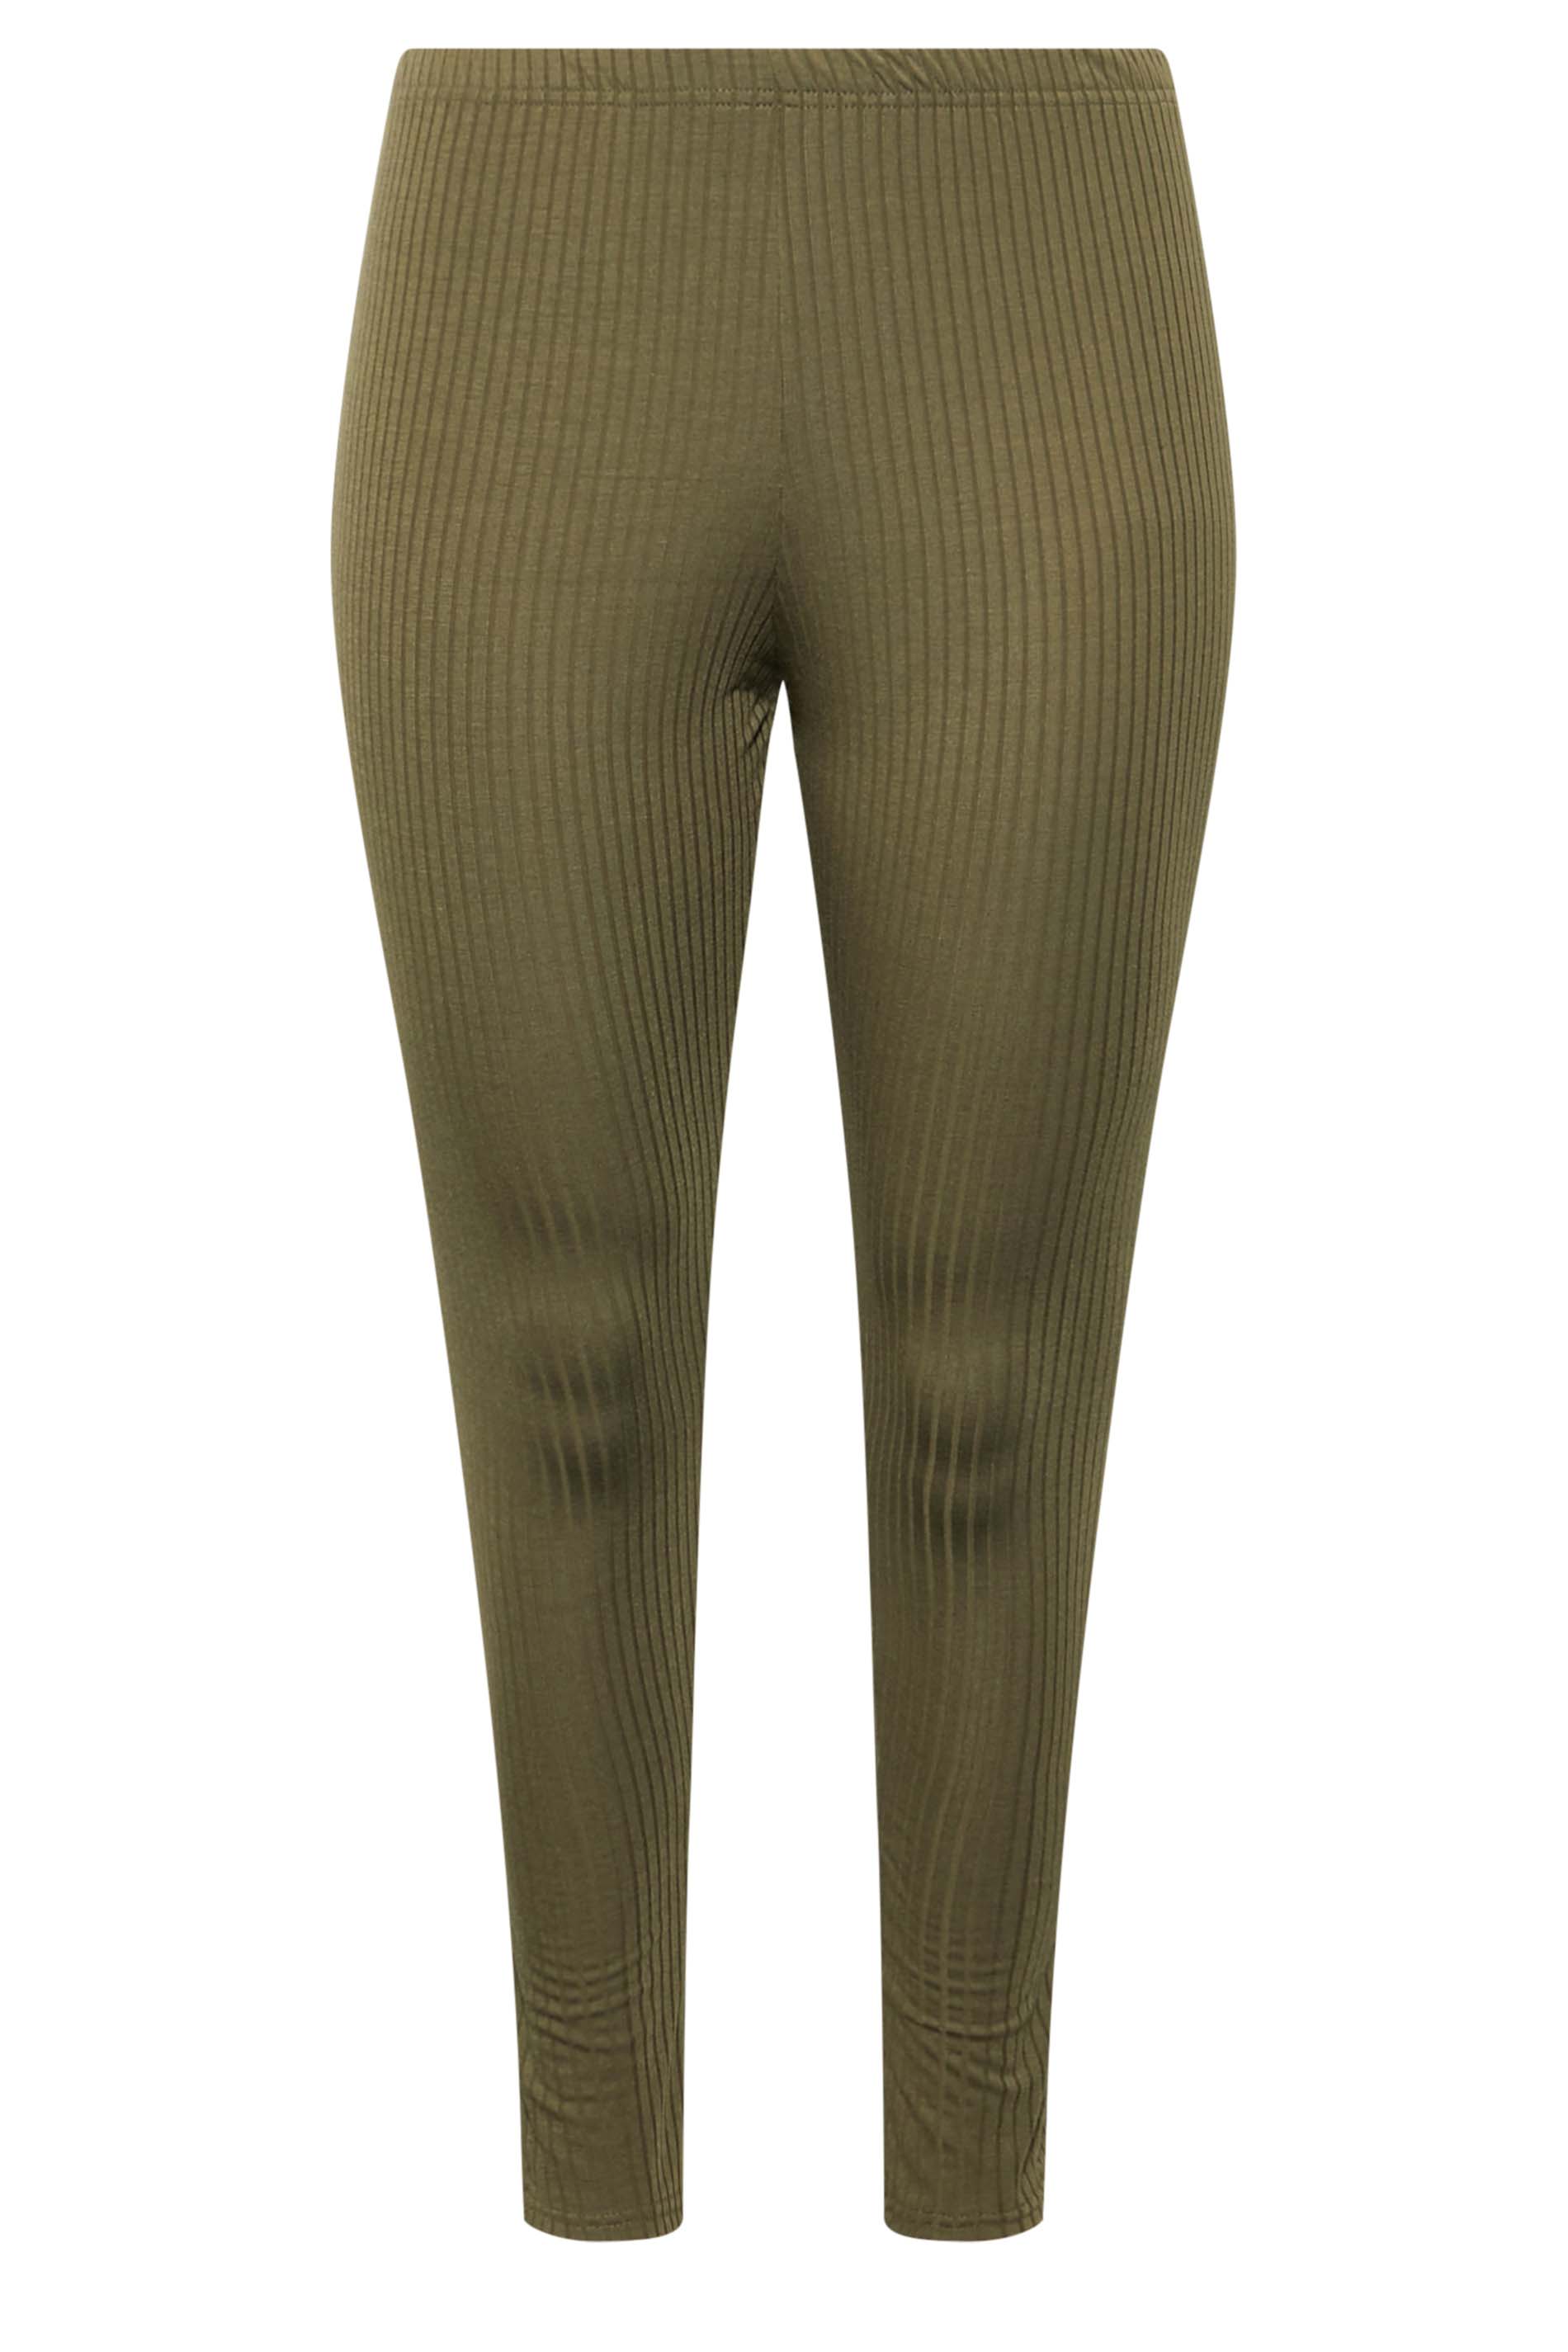 LIMITED COLLECTION Plus Size Khaki Green Ribbed Leggings